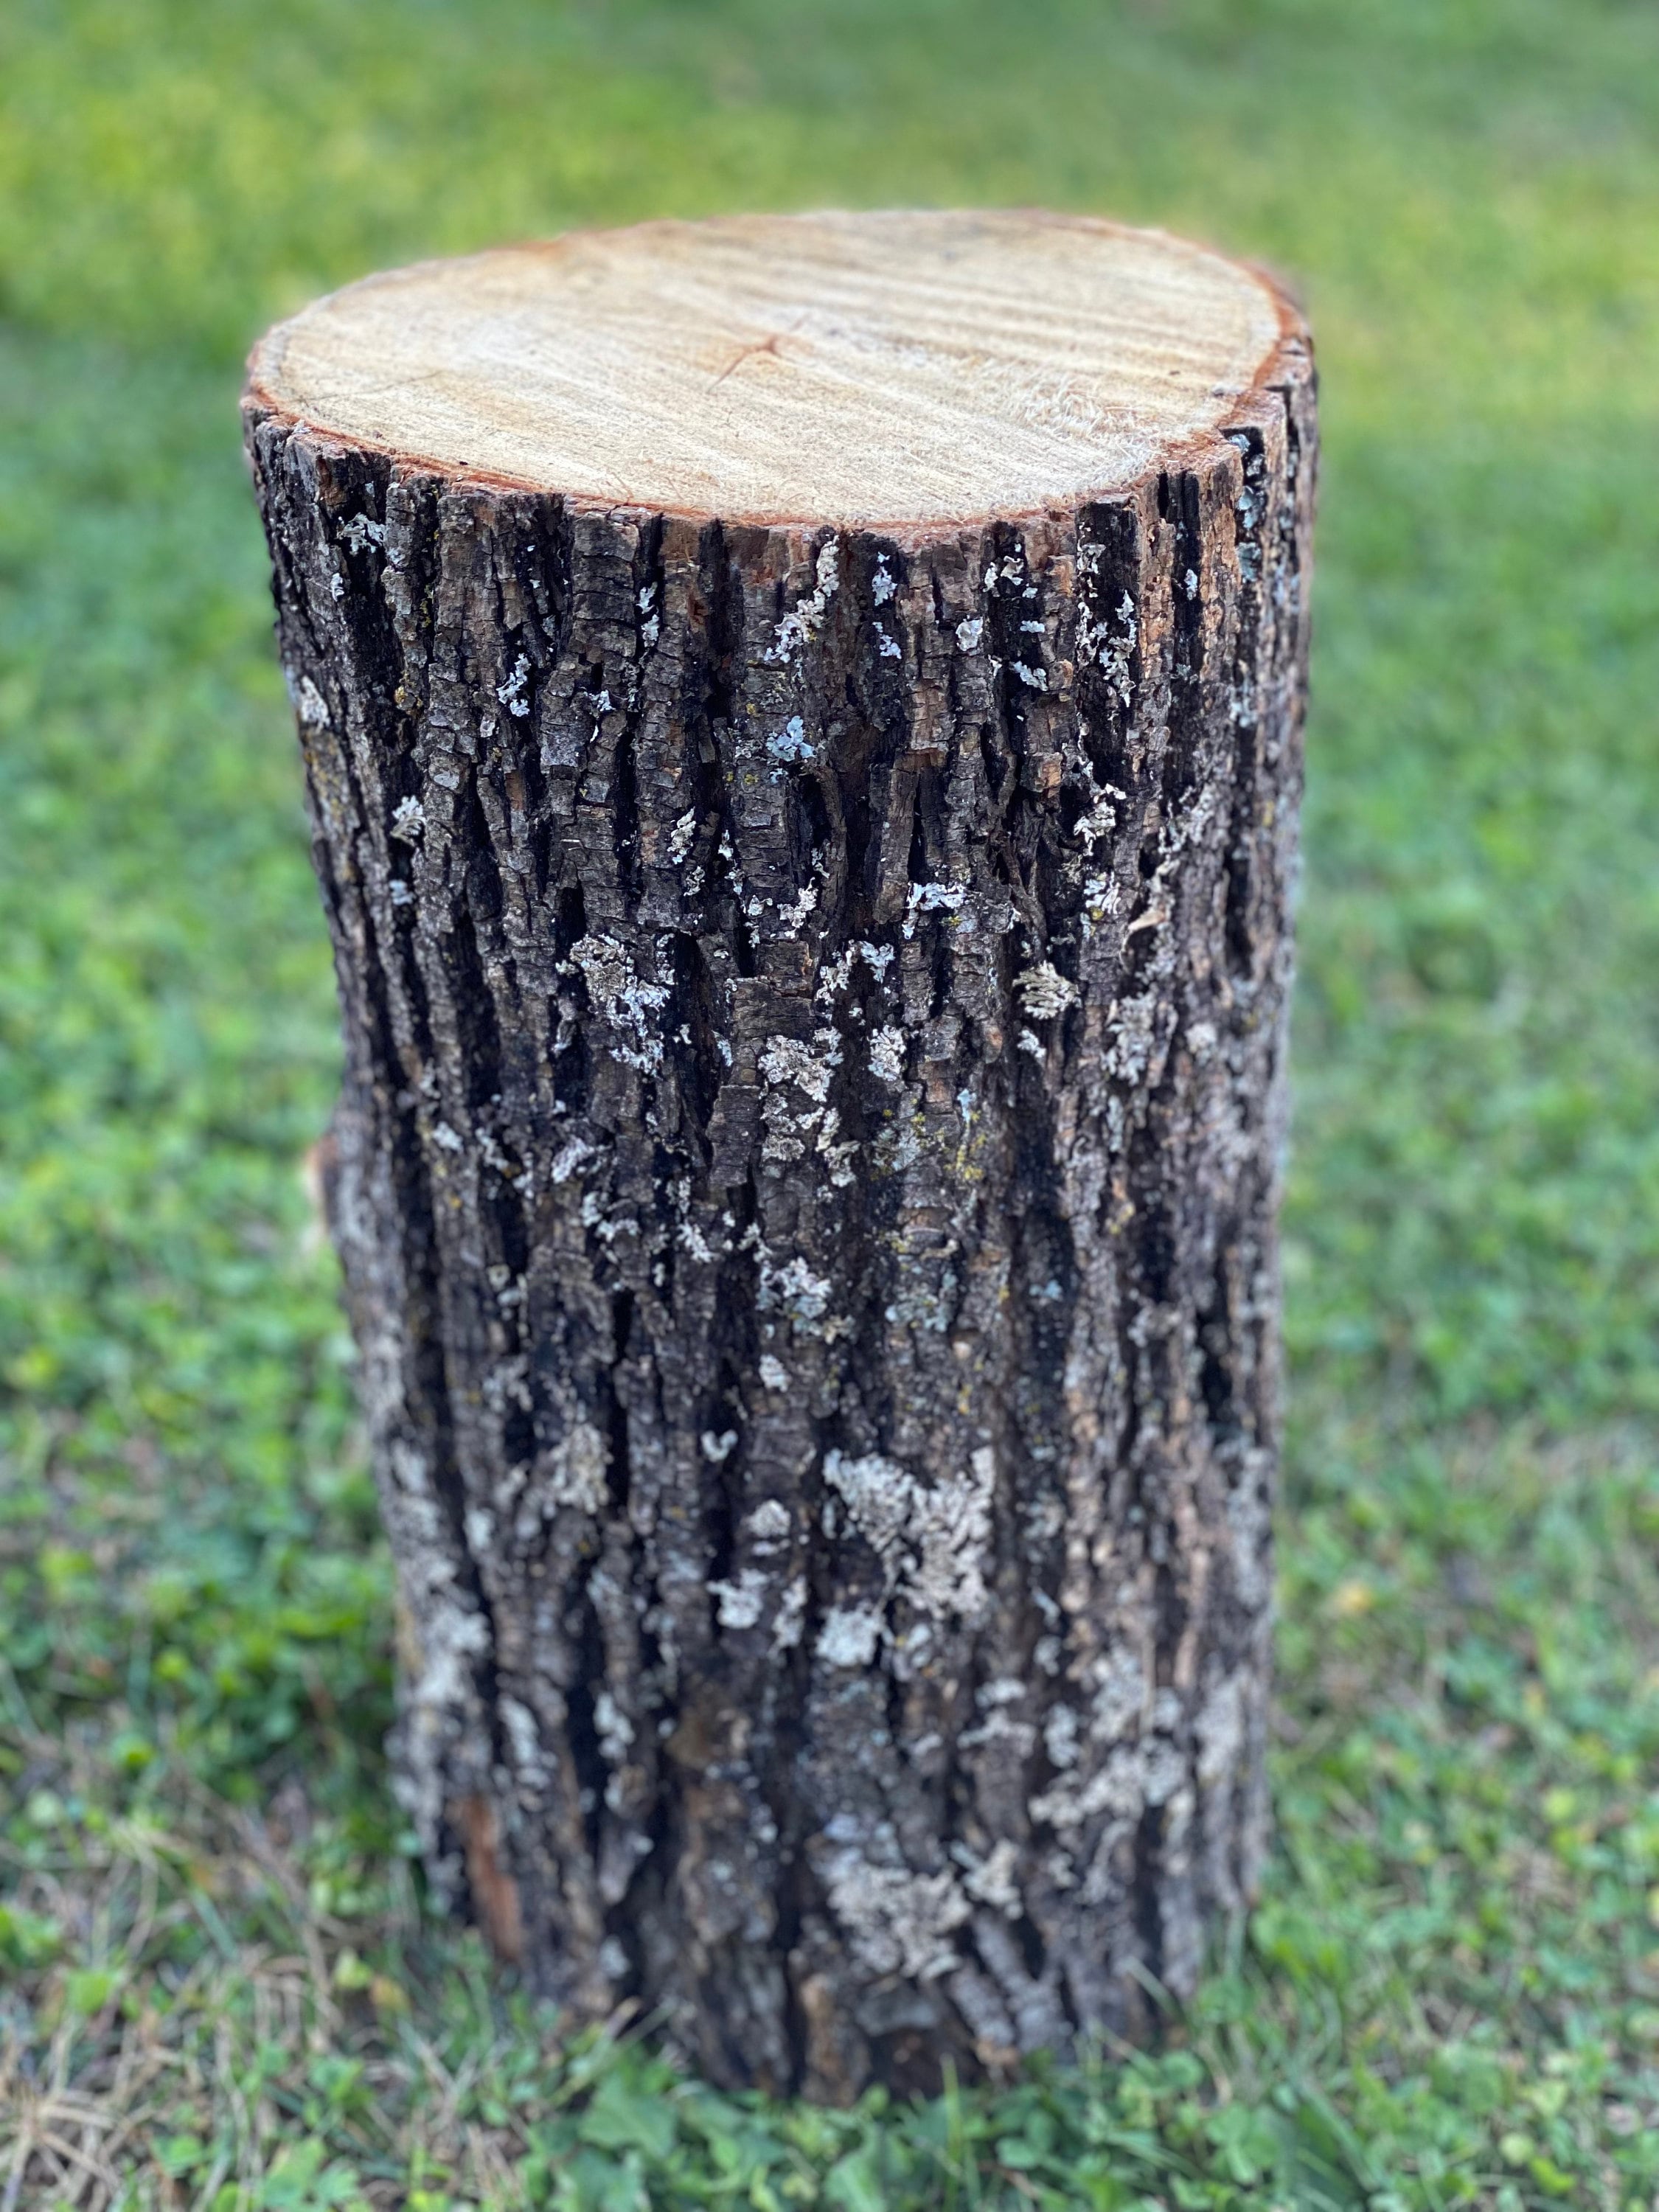 Basswood Log, One Count, About 12 Inches Long by 8 Inches Diameter